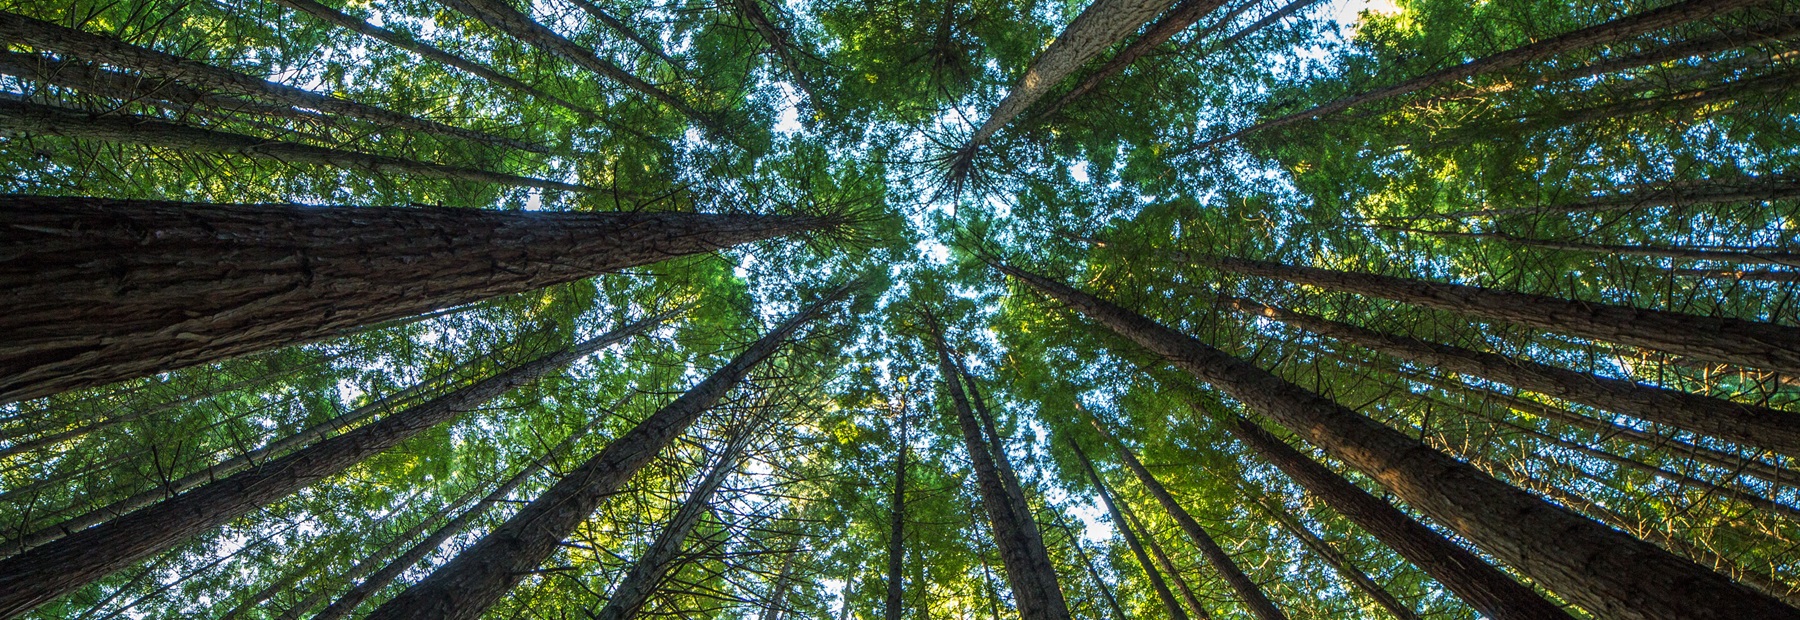 Image of tall trees